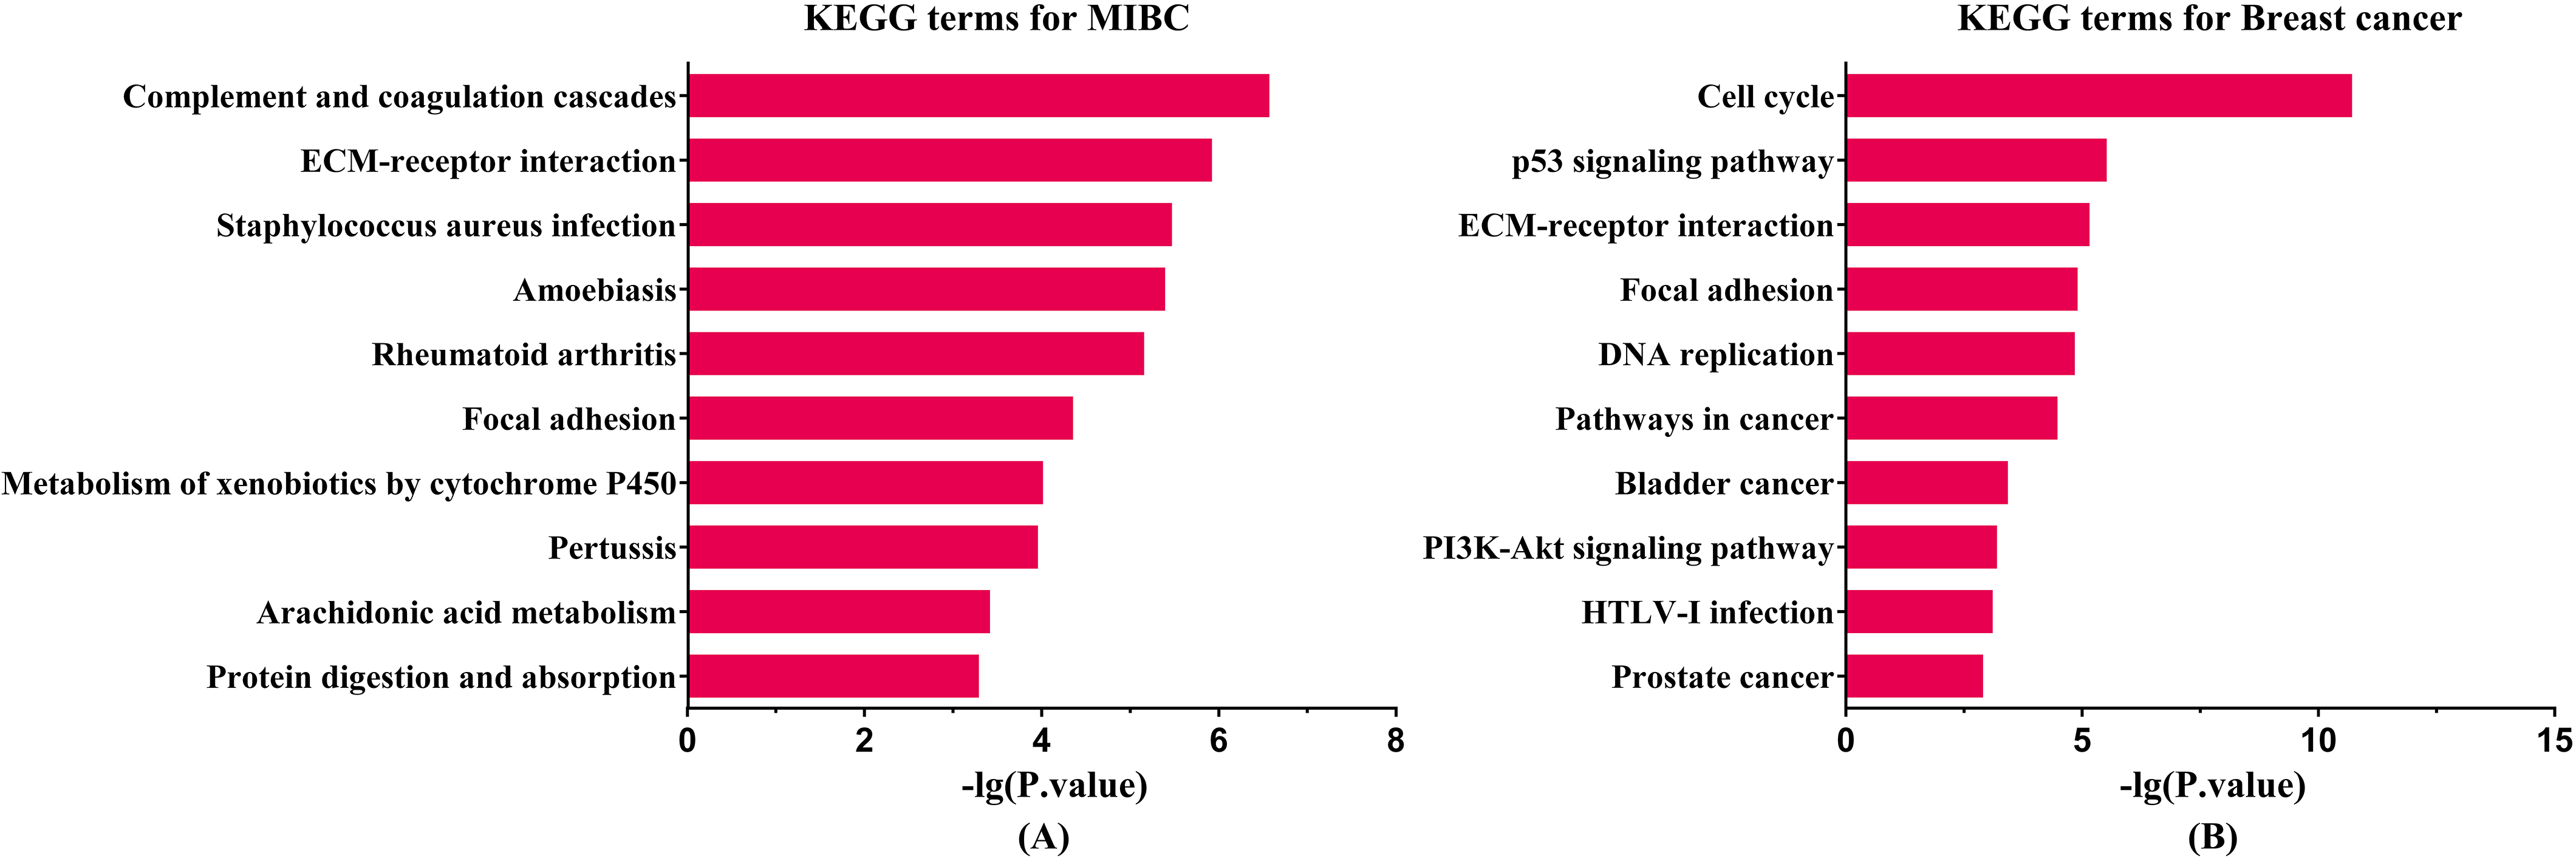 KEGG enrichment analysis results for two cancers. The length of bar is positive correlation with significant level. (A) Enriched KEGG pathway for MIBC. (B) Enriched KEGG pathway for breast cancer.